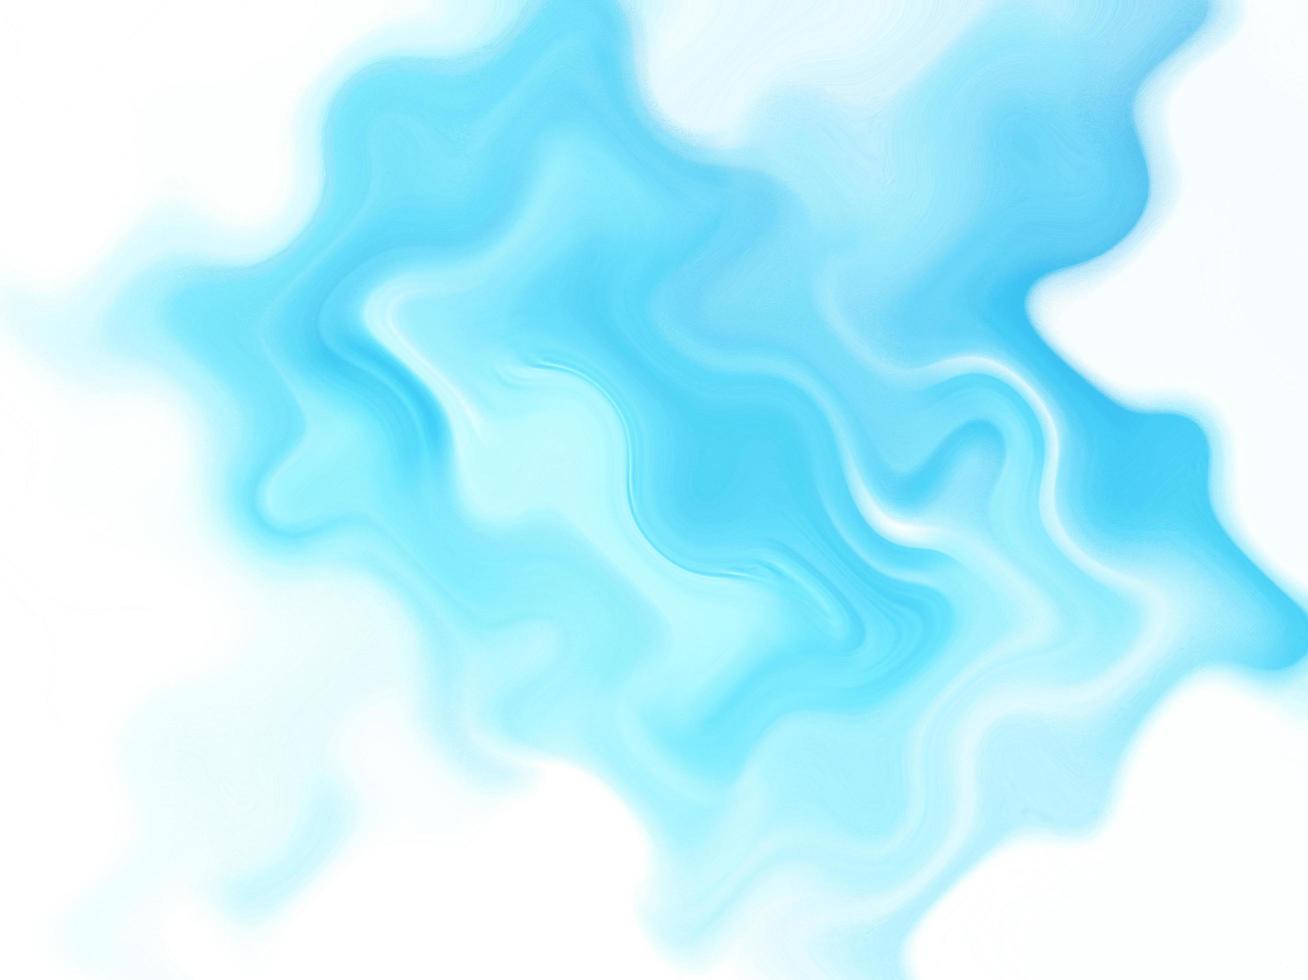 Abstract Background With Light Blue Acrylic Paint Free Stock Photo